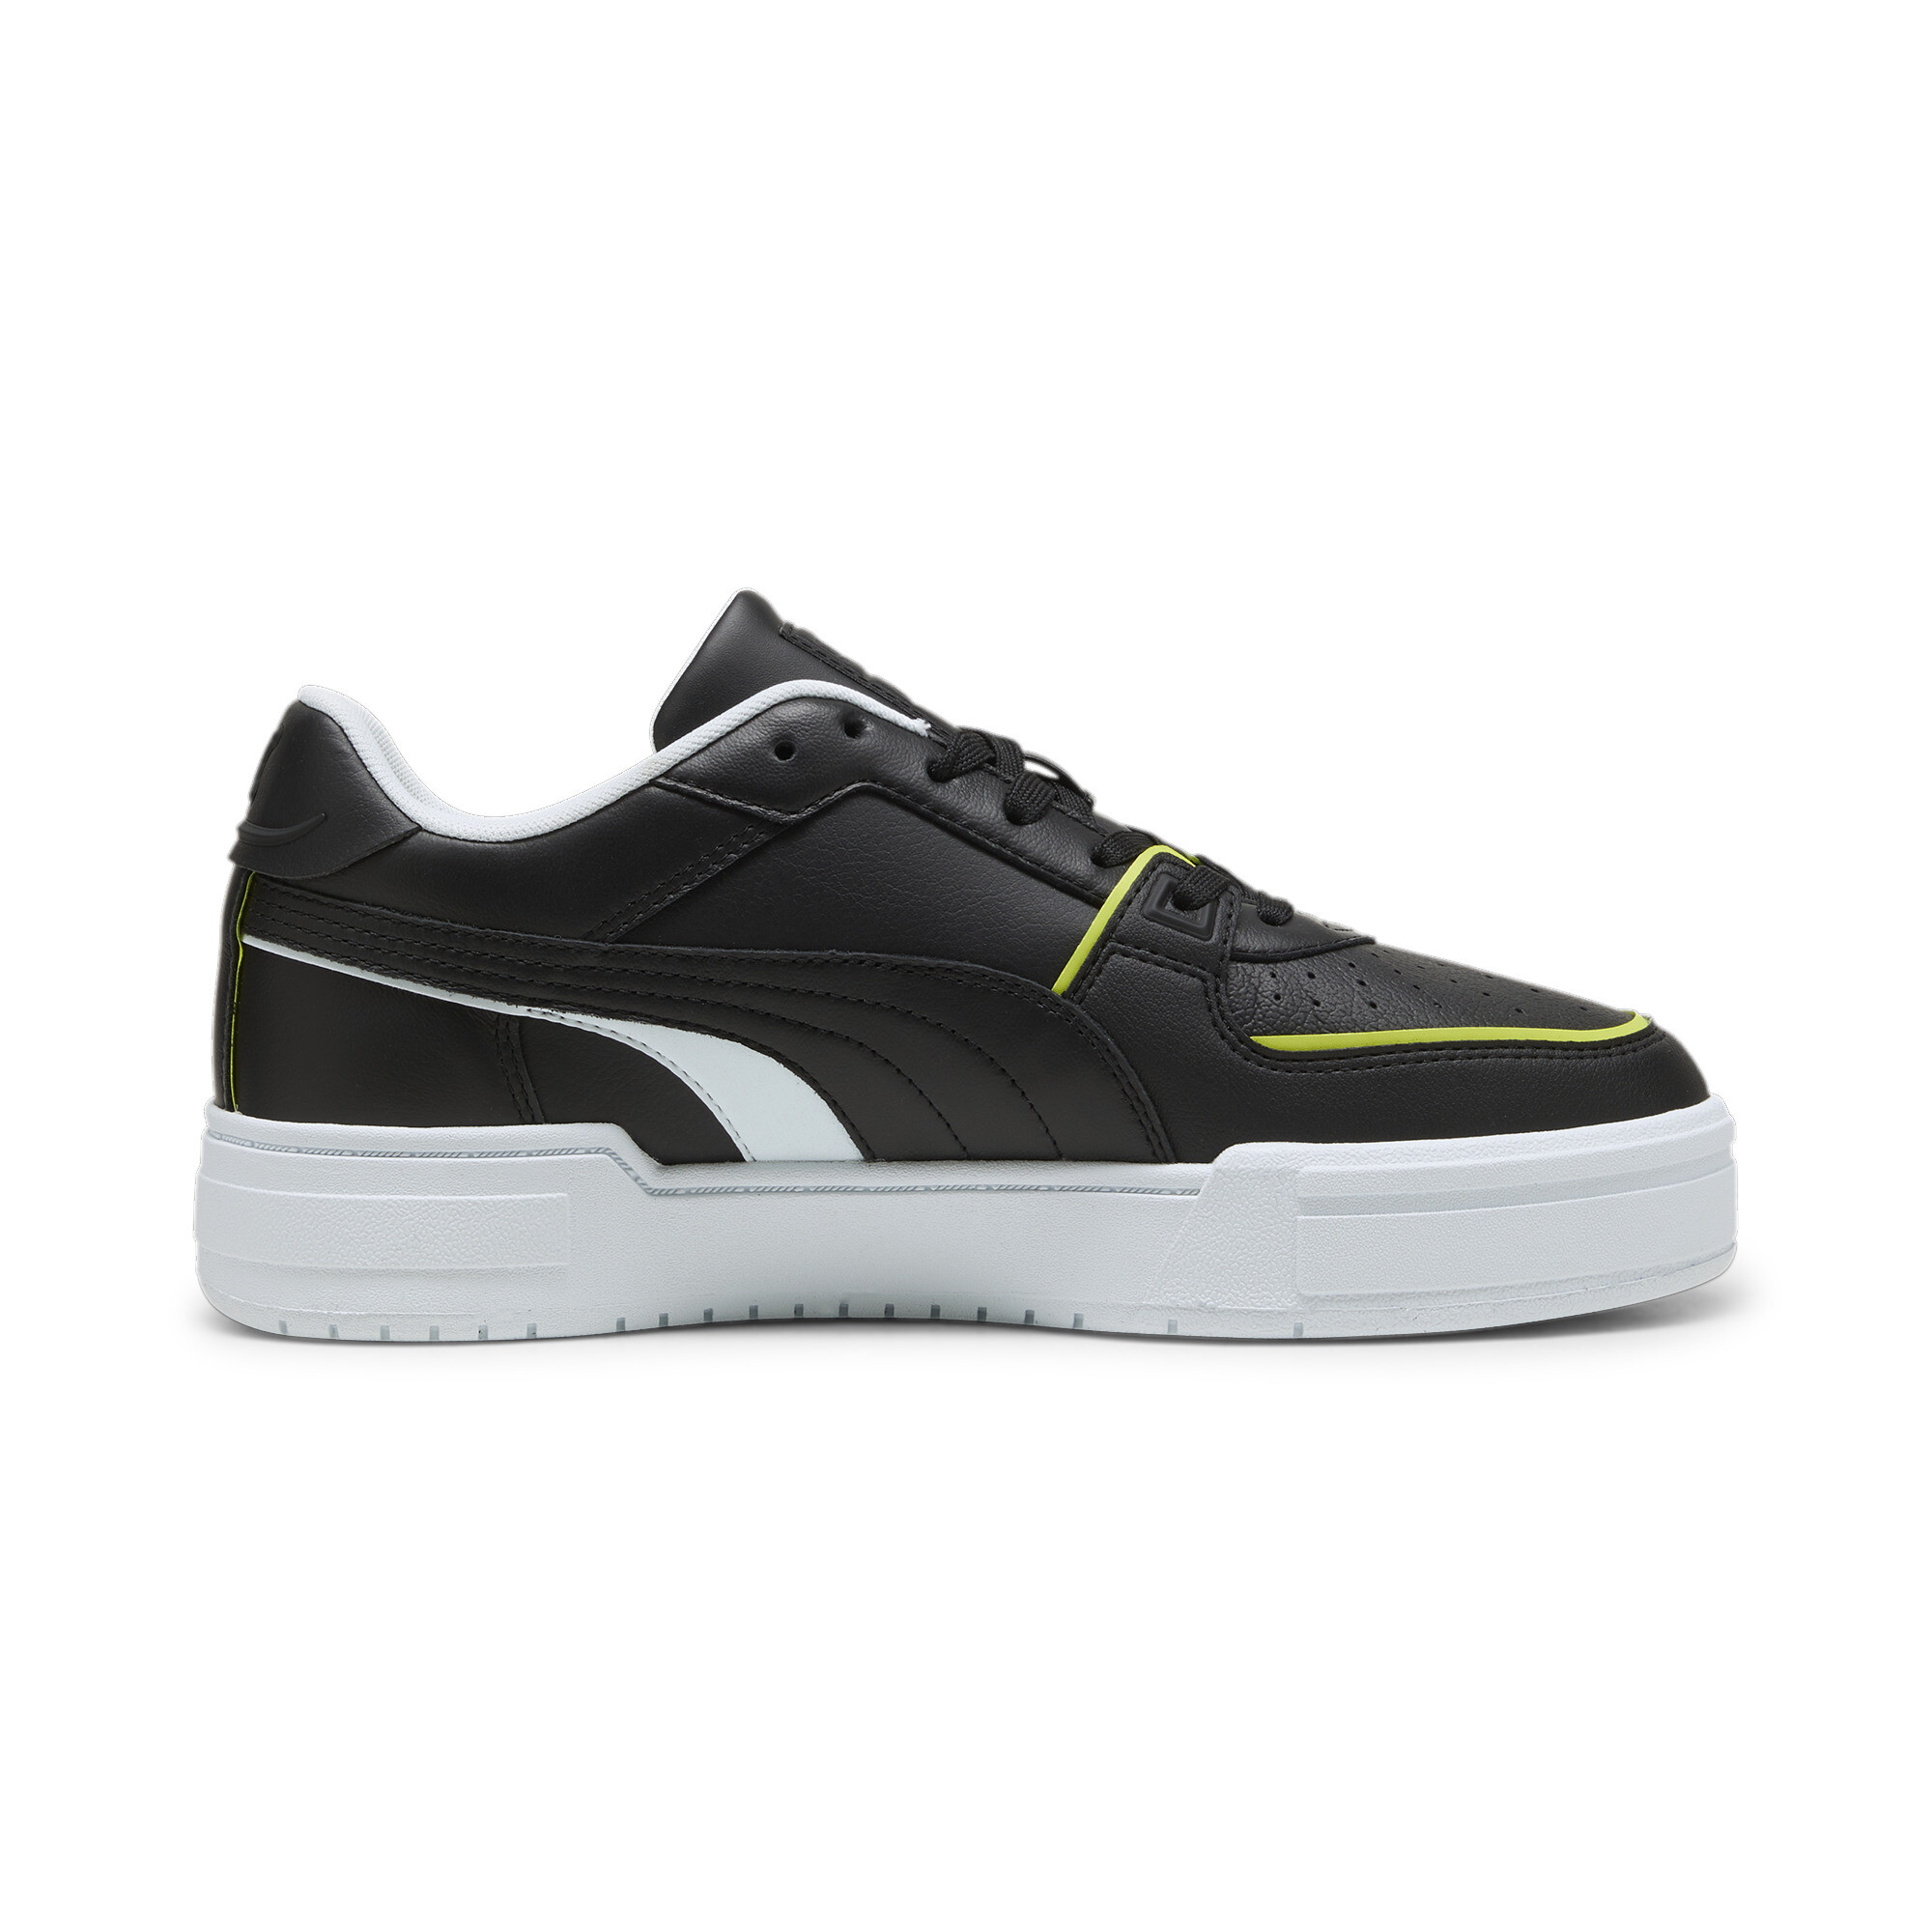 Puma AMG CA Pro Sneakers, Black, Size 43, Shoes